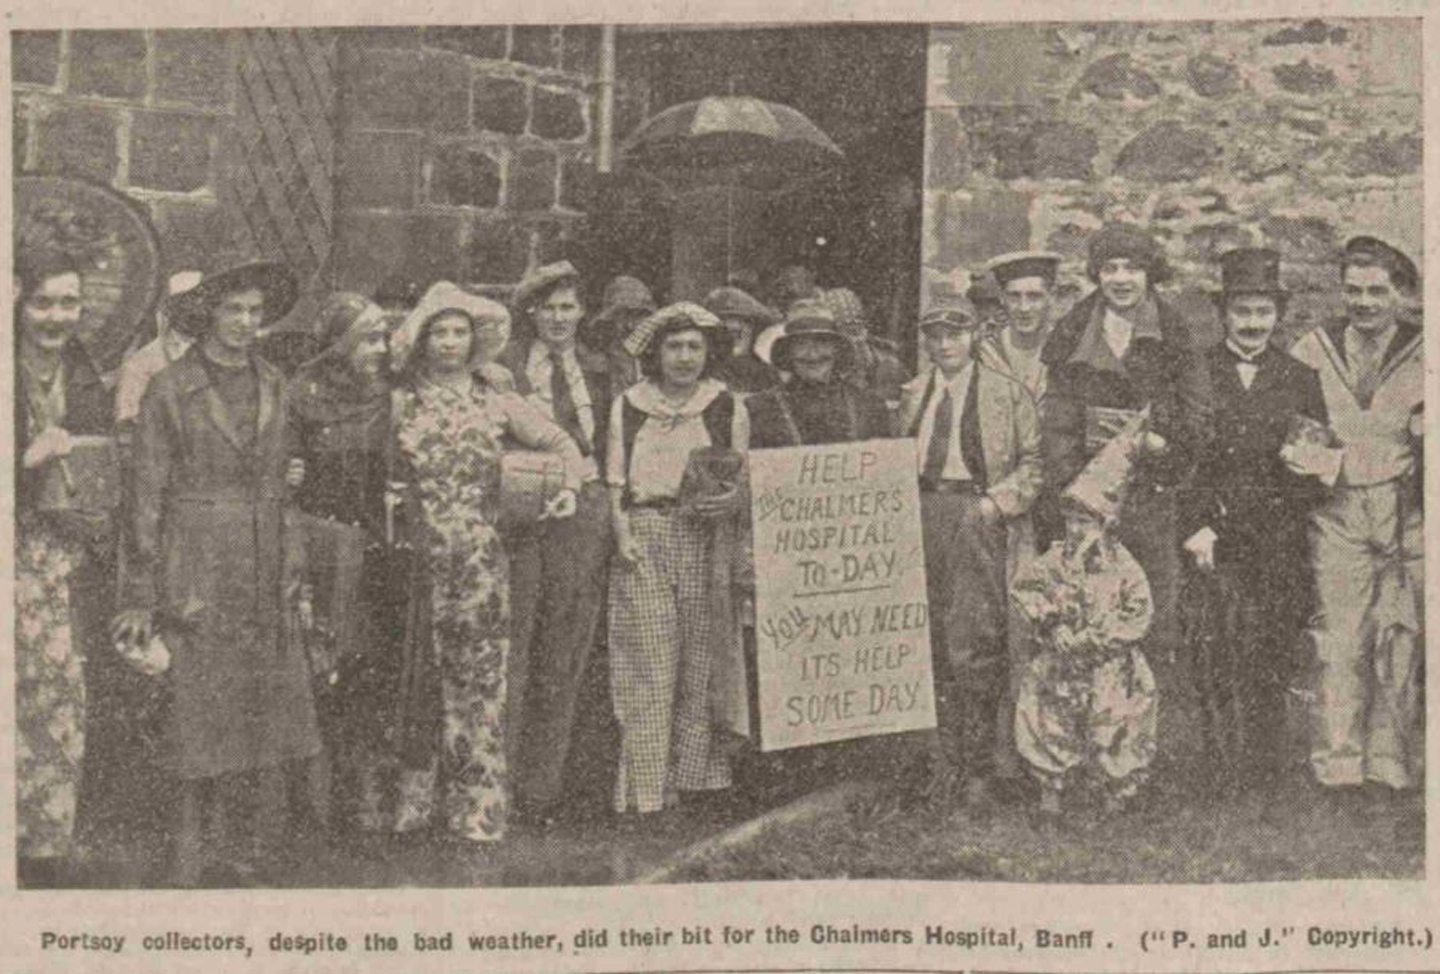 Newspaper clipping from 1932 showing members of the public at a fundraiser for Chalmers Hospital in Banff.